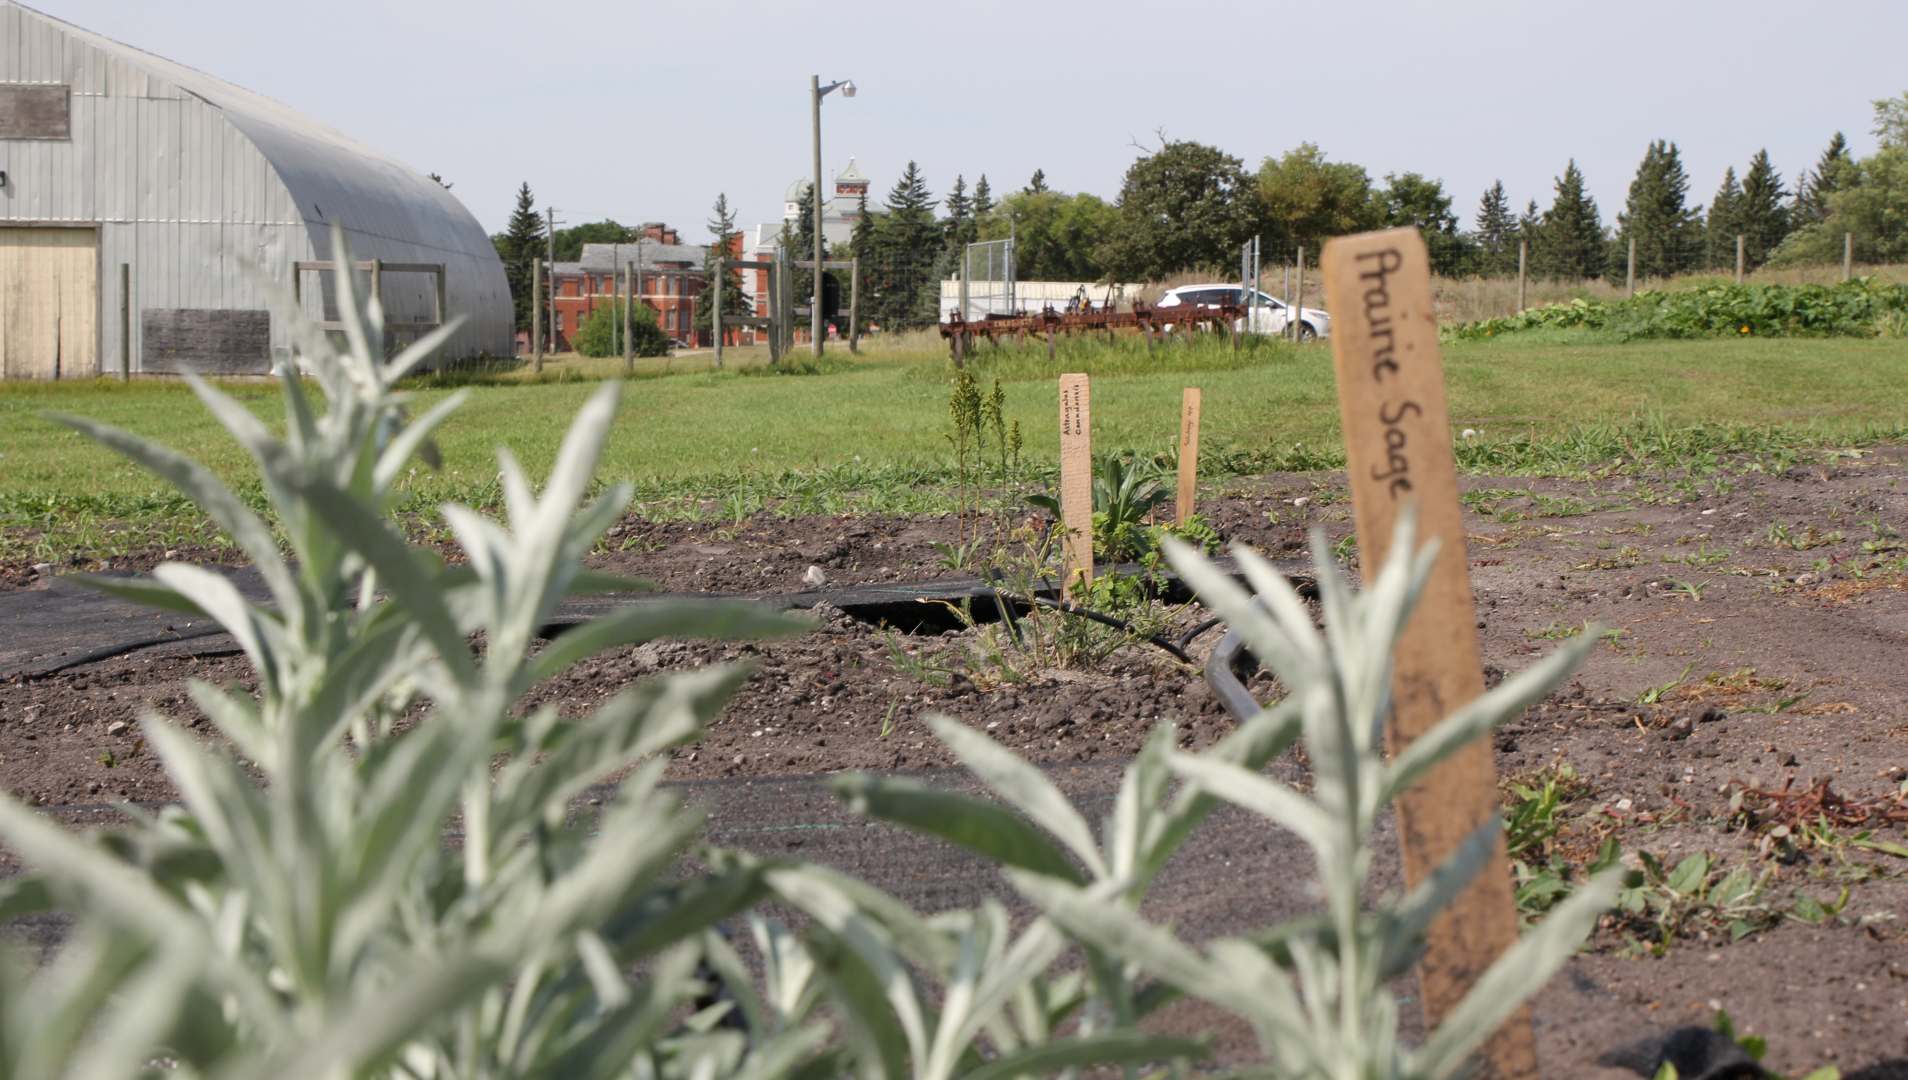 Photo featuring a prairie sage plant out of focus in the foreground with a quonsit and historic North Hill campus building in focus in the background. building and 